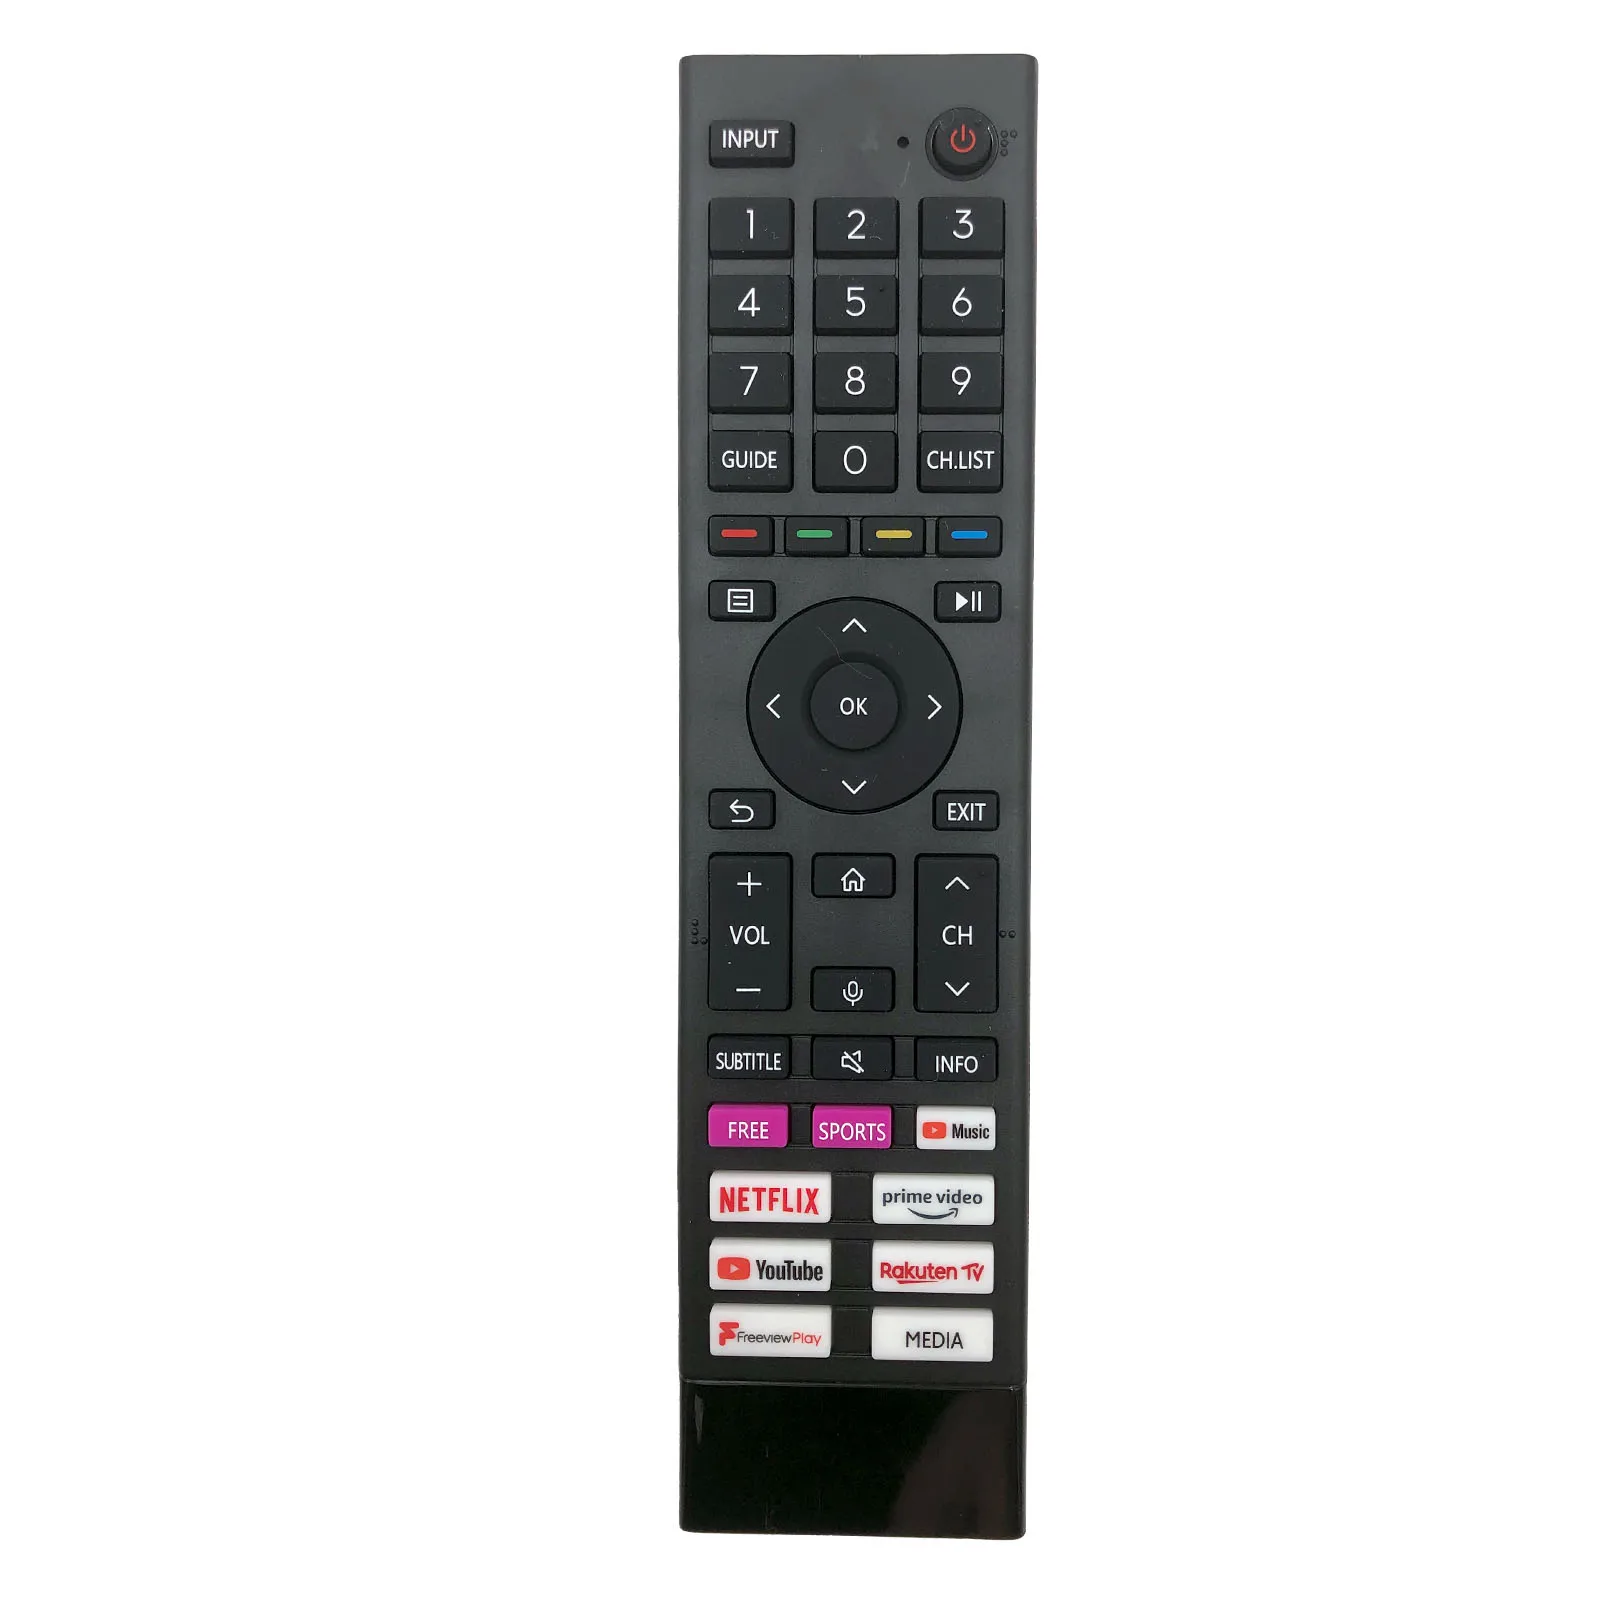 

Used ERF3A80 Bluetooth Voice Remote Control for Hisense 4K UHD Smart Android TV